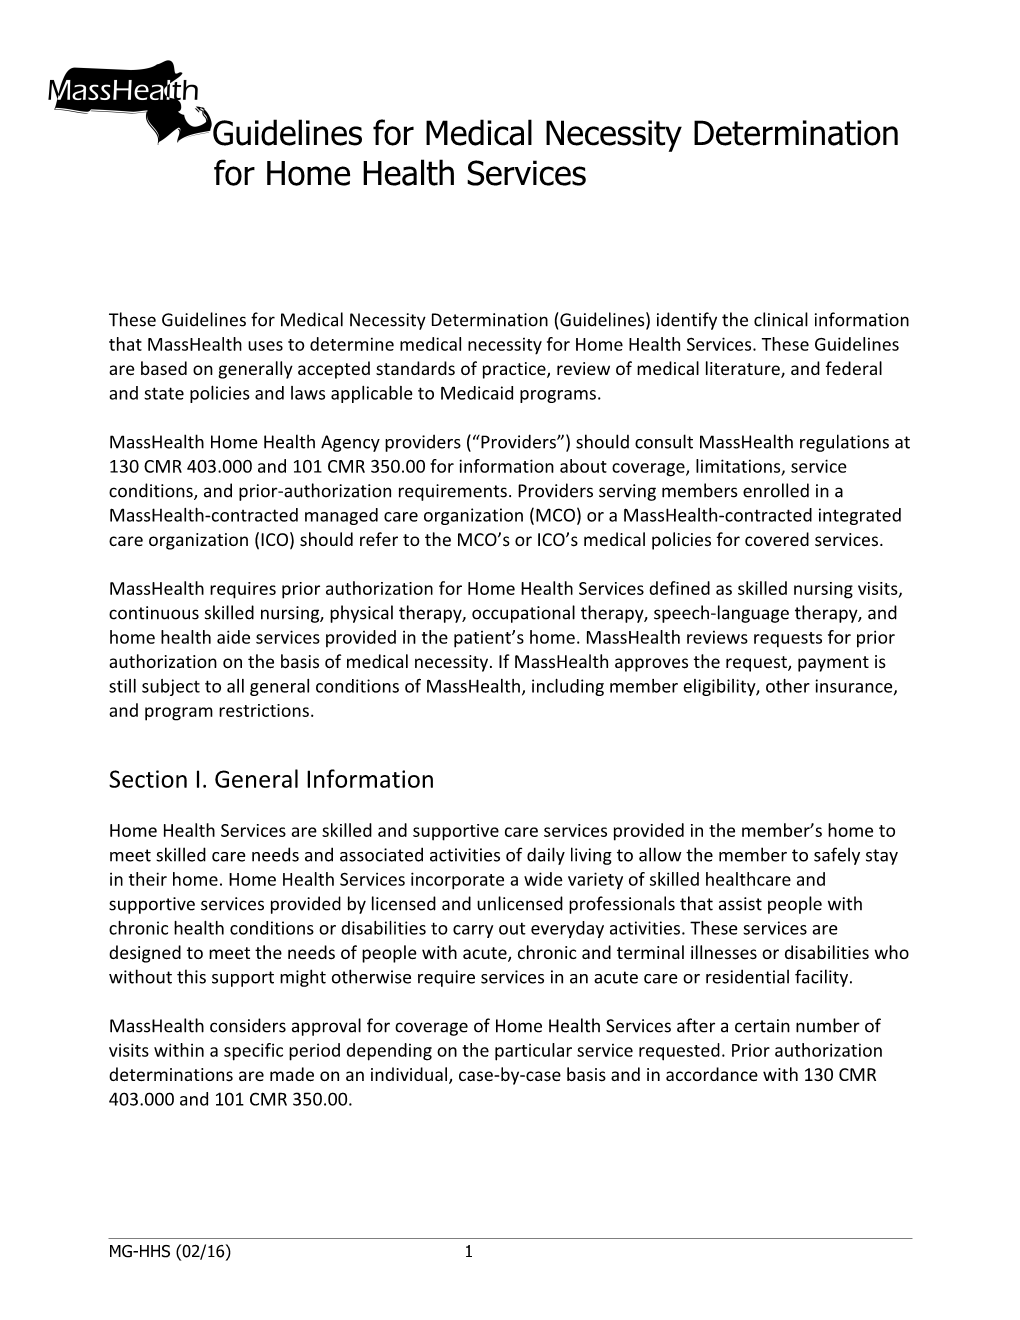 Guidelines for Medical Necessity Determination for Home Health Services